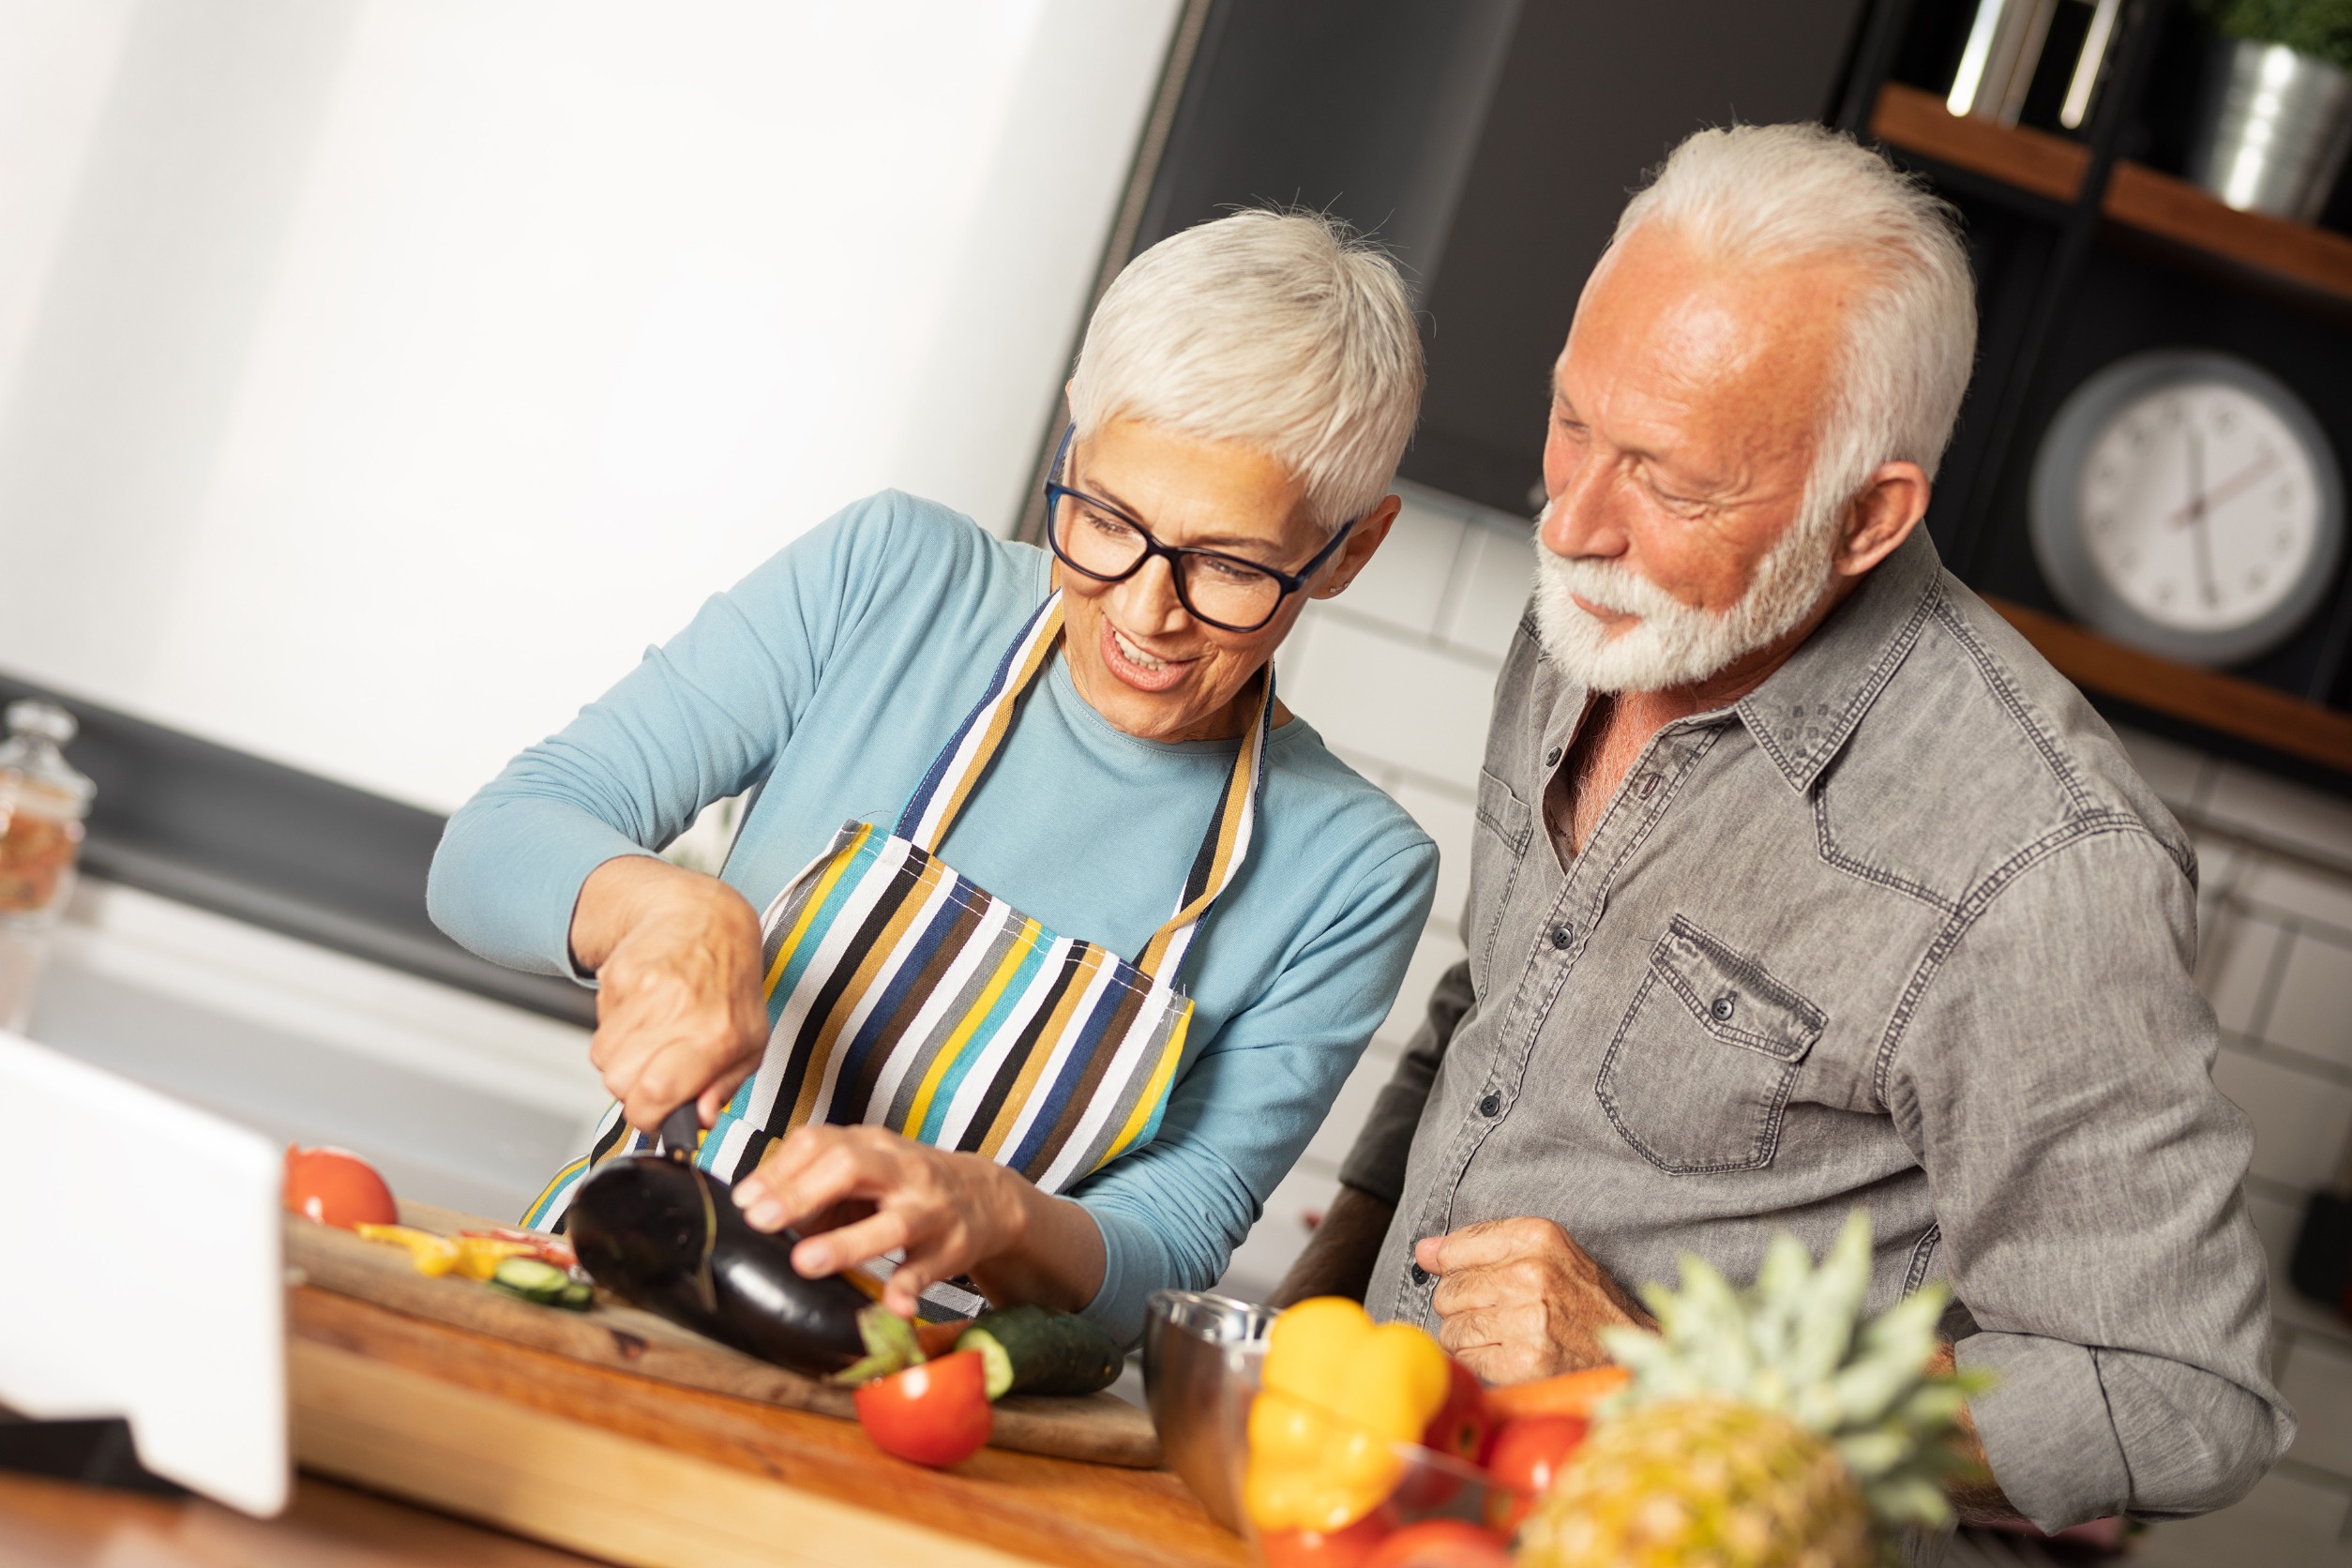 Ways for Seniors to Stay Cool with Food and Drink This Summer